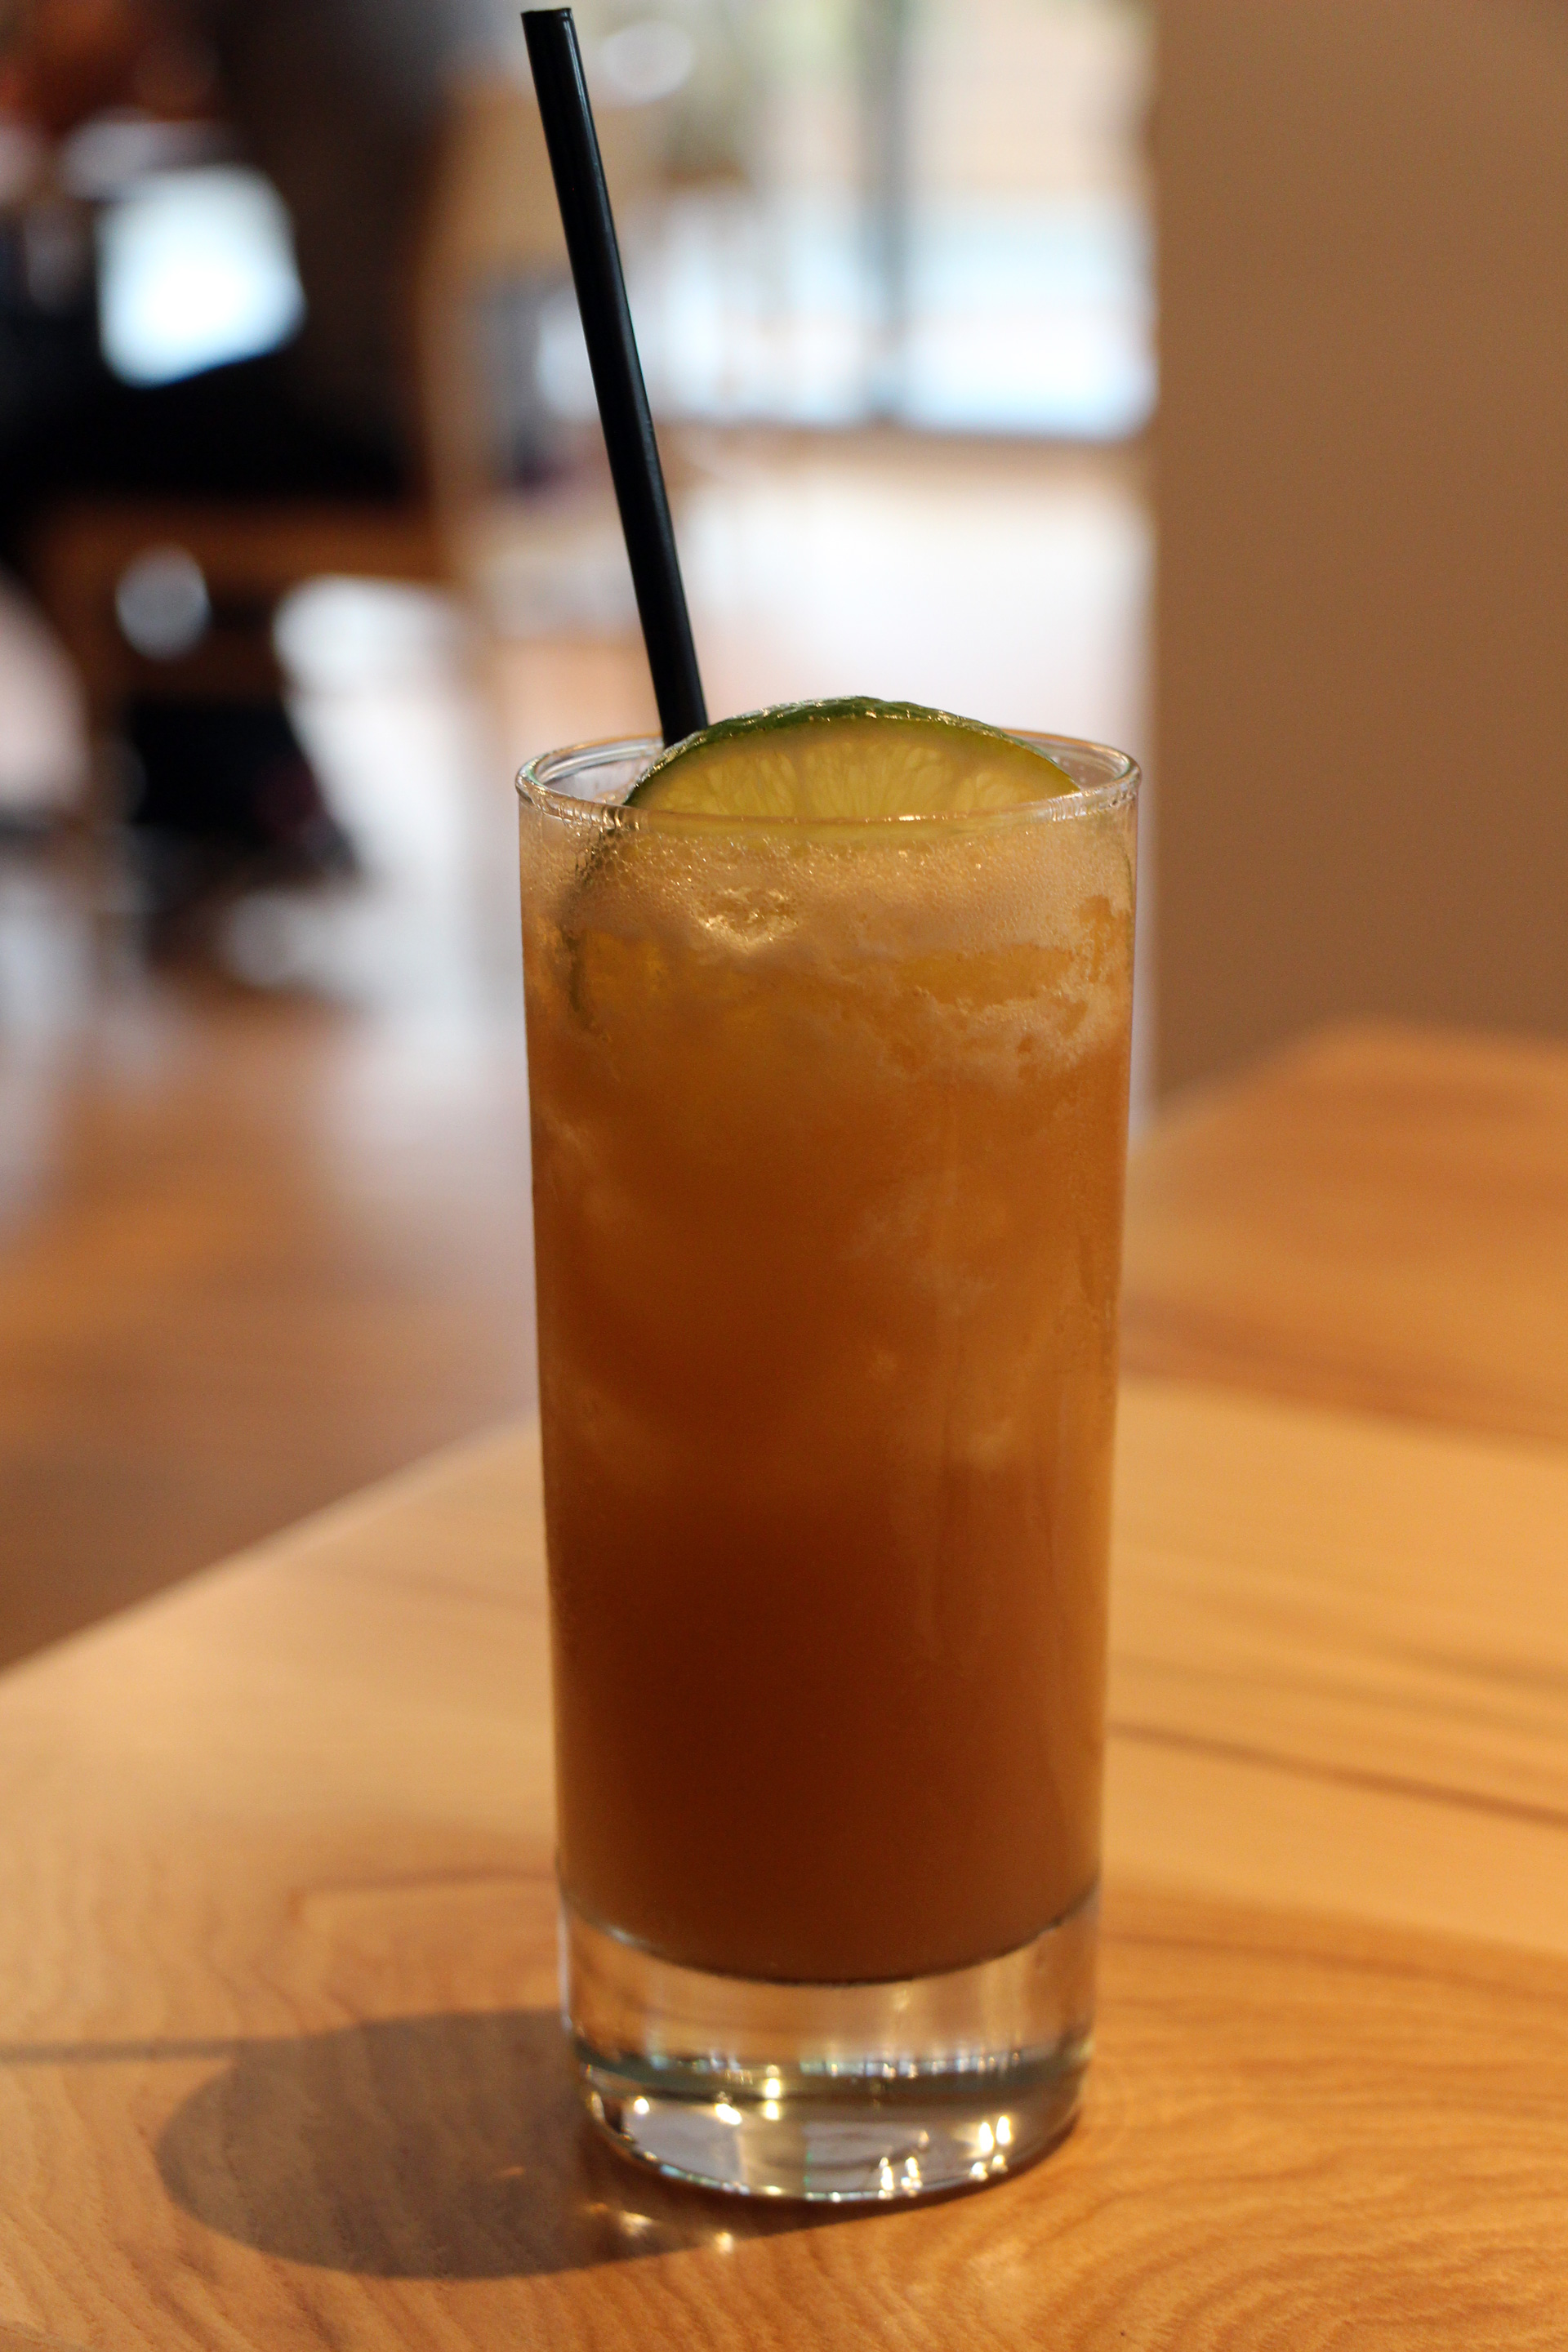 House-made ginger beer